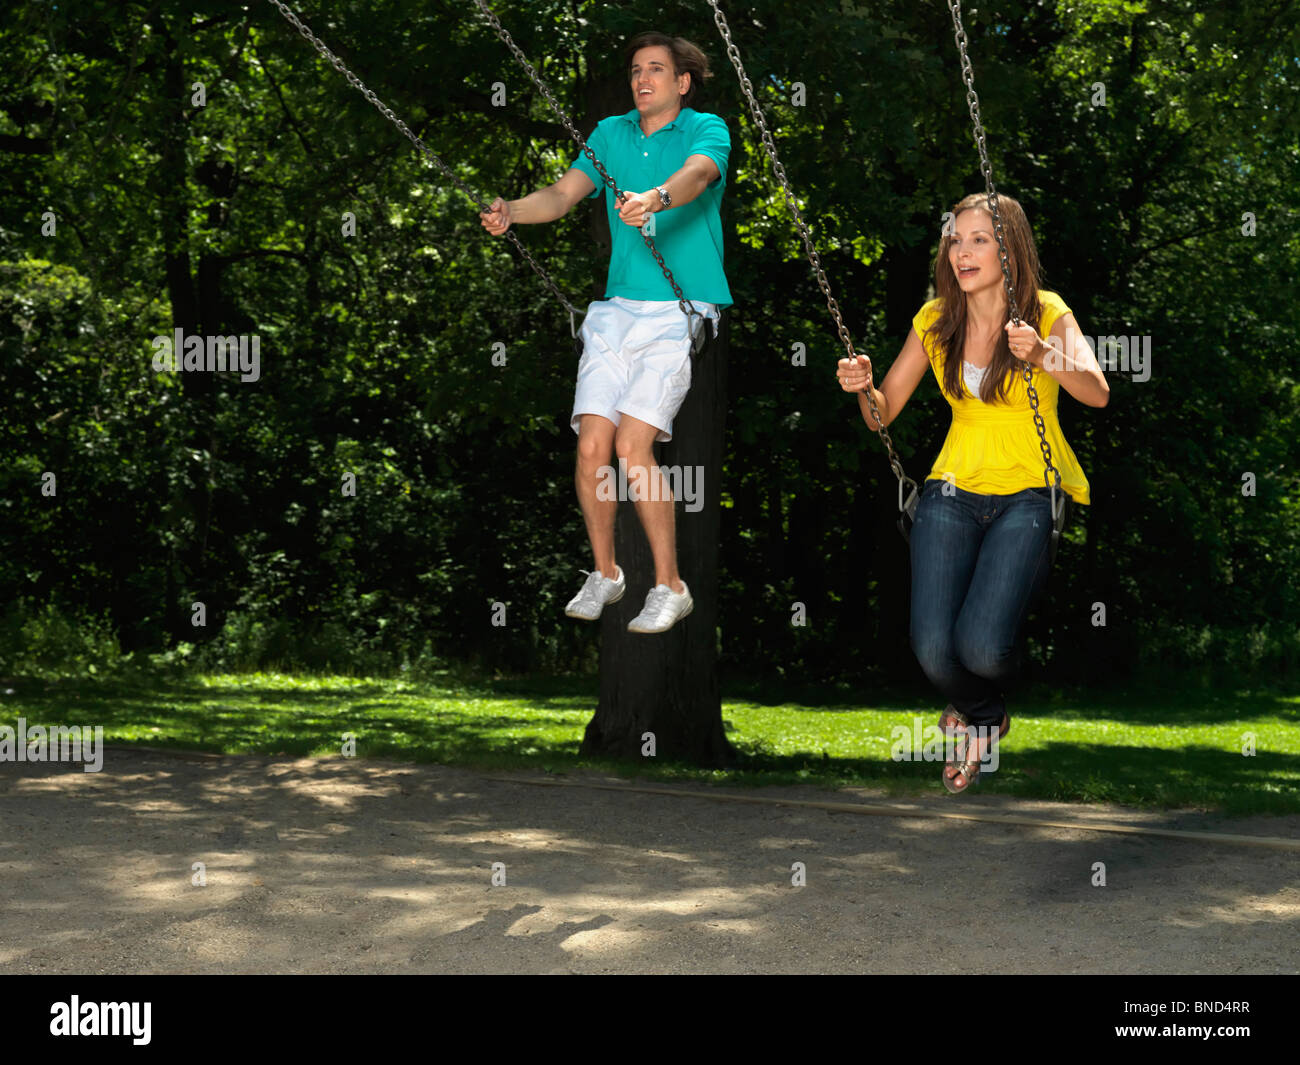 Young couple in their thirties having fun on a swing at children's playground Stock Photo